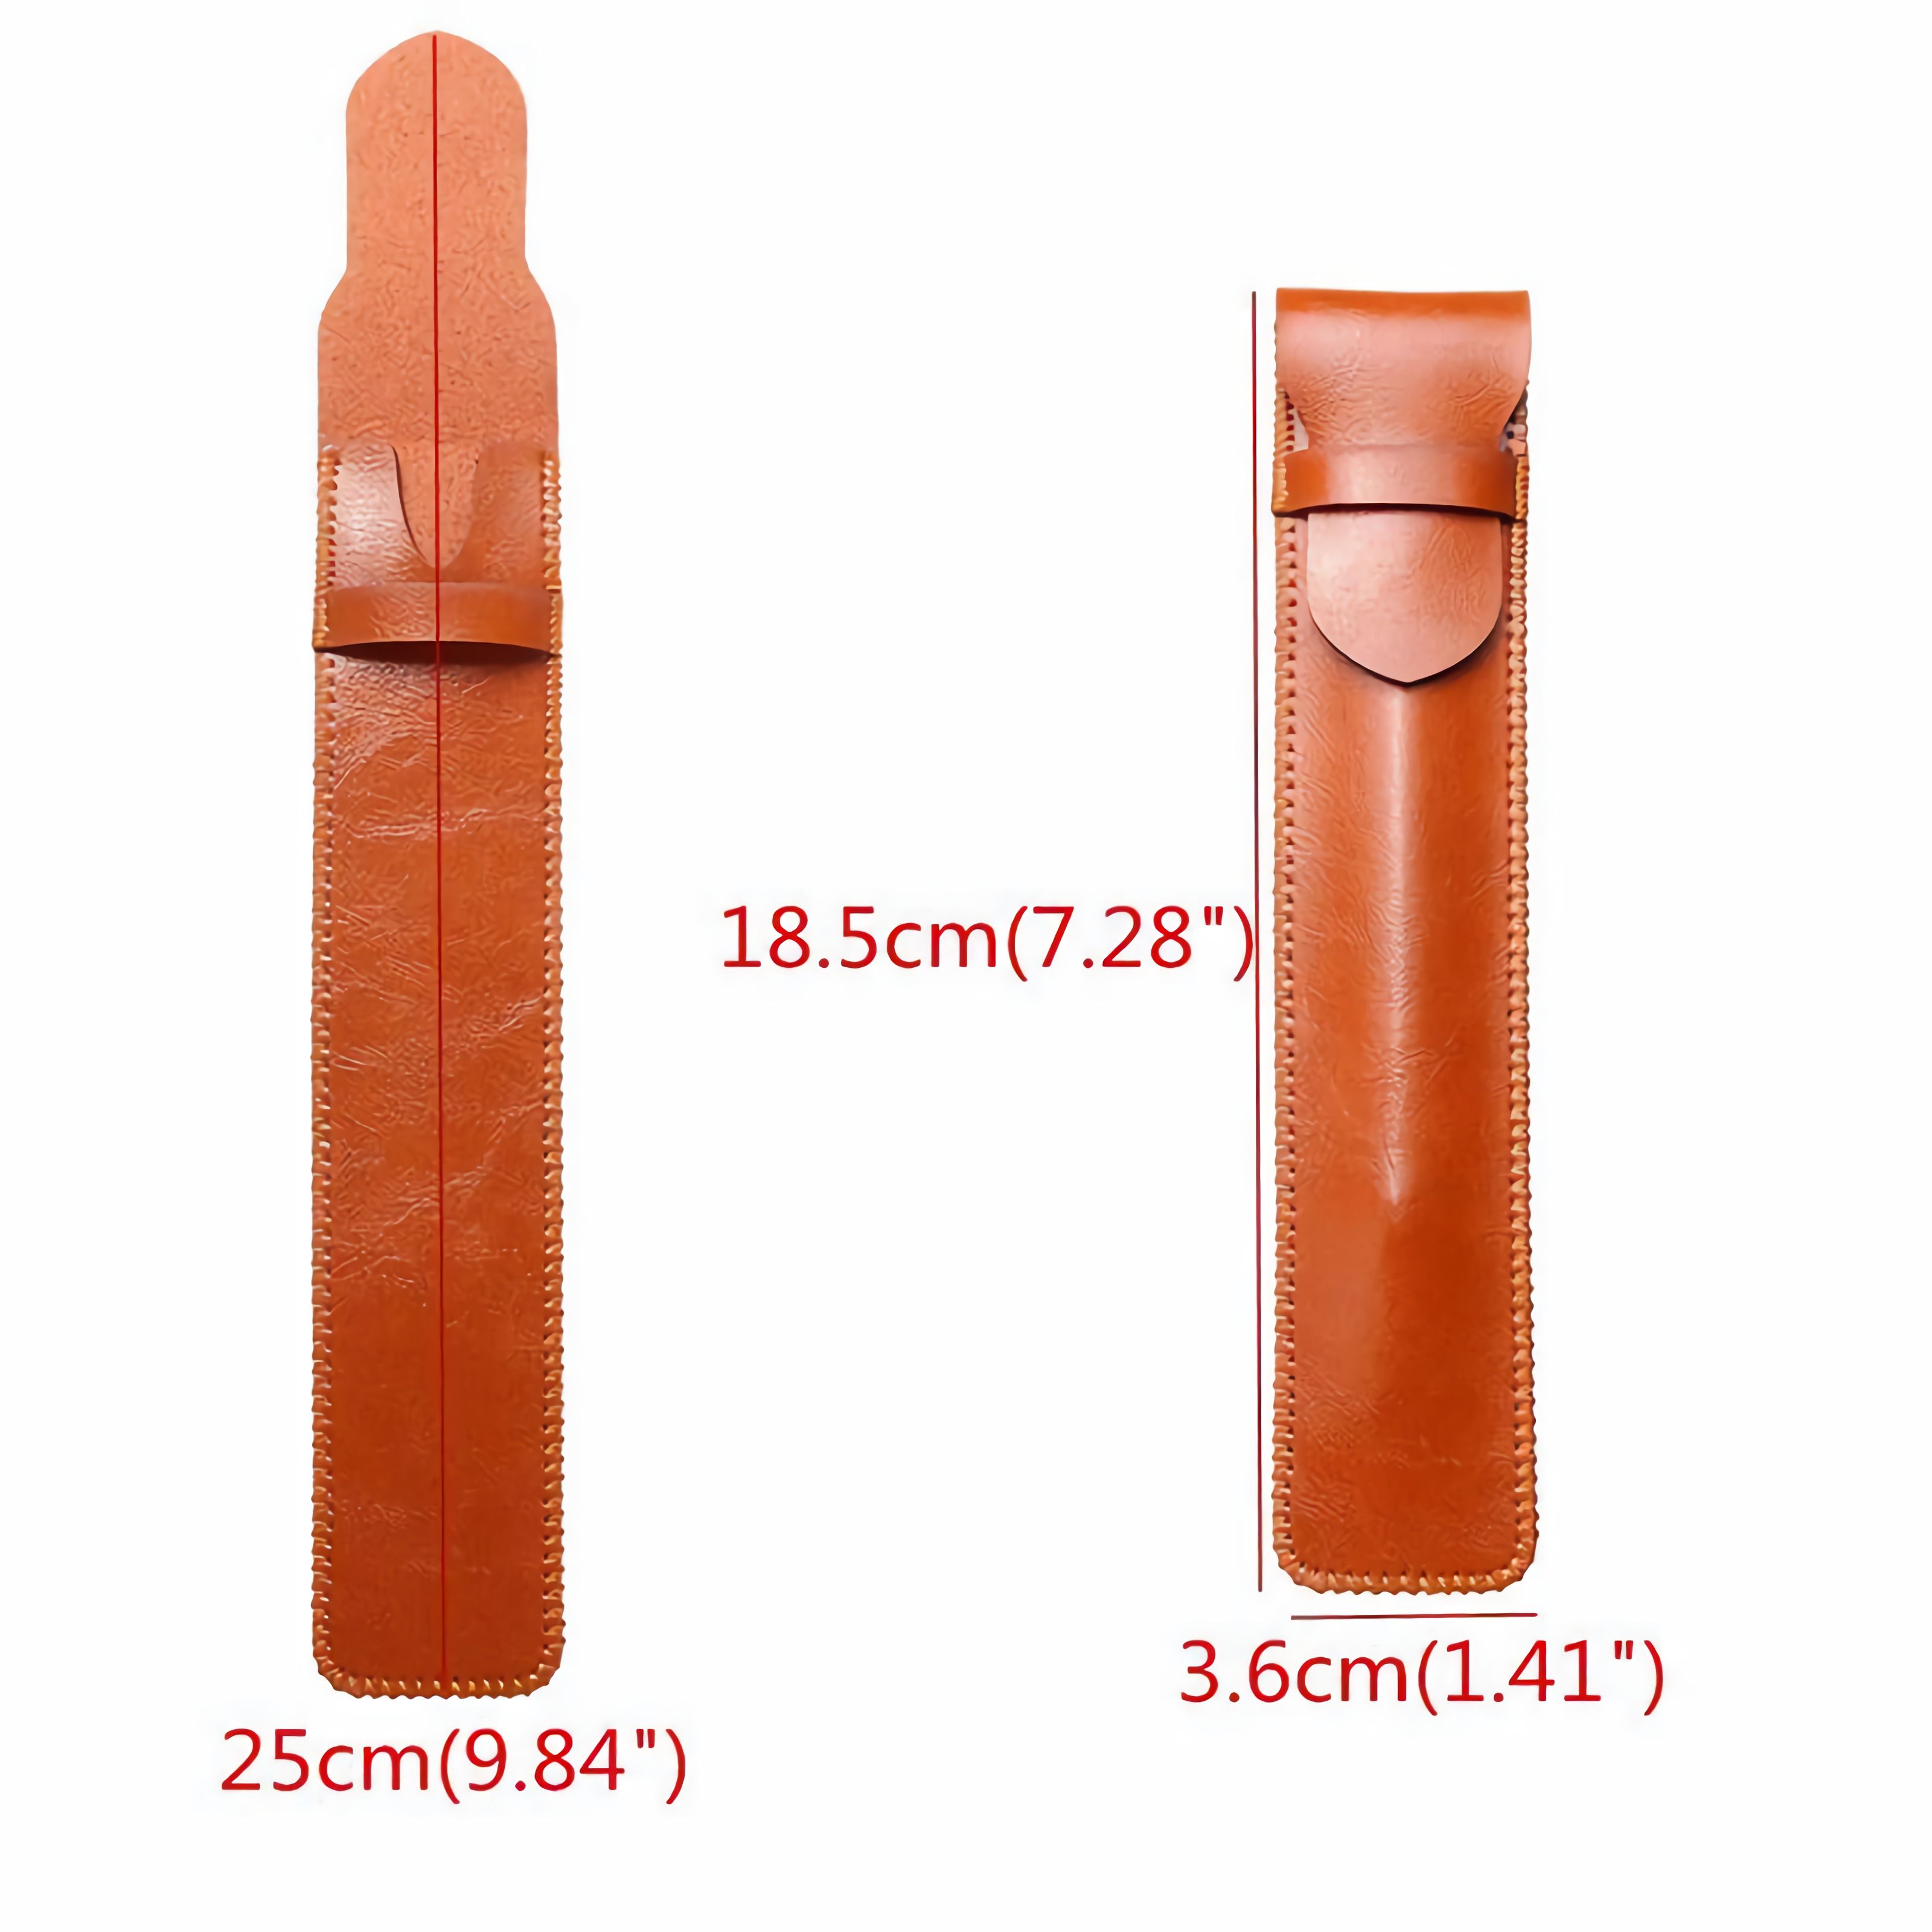 Pencil-PU-Leather-Case-Cover-Touch-Stylus-Pen-Protect-Pouch-Bag-For-Tablet-Laptop-Stylus-Bag-1656952